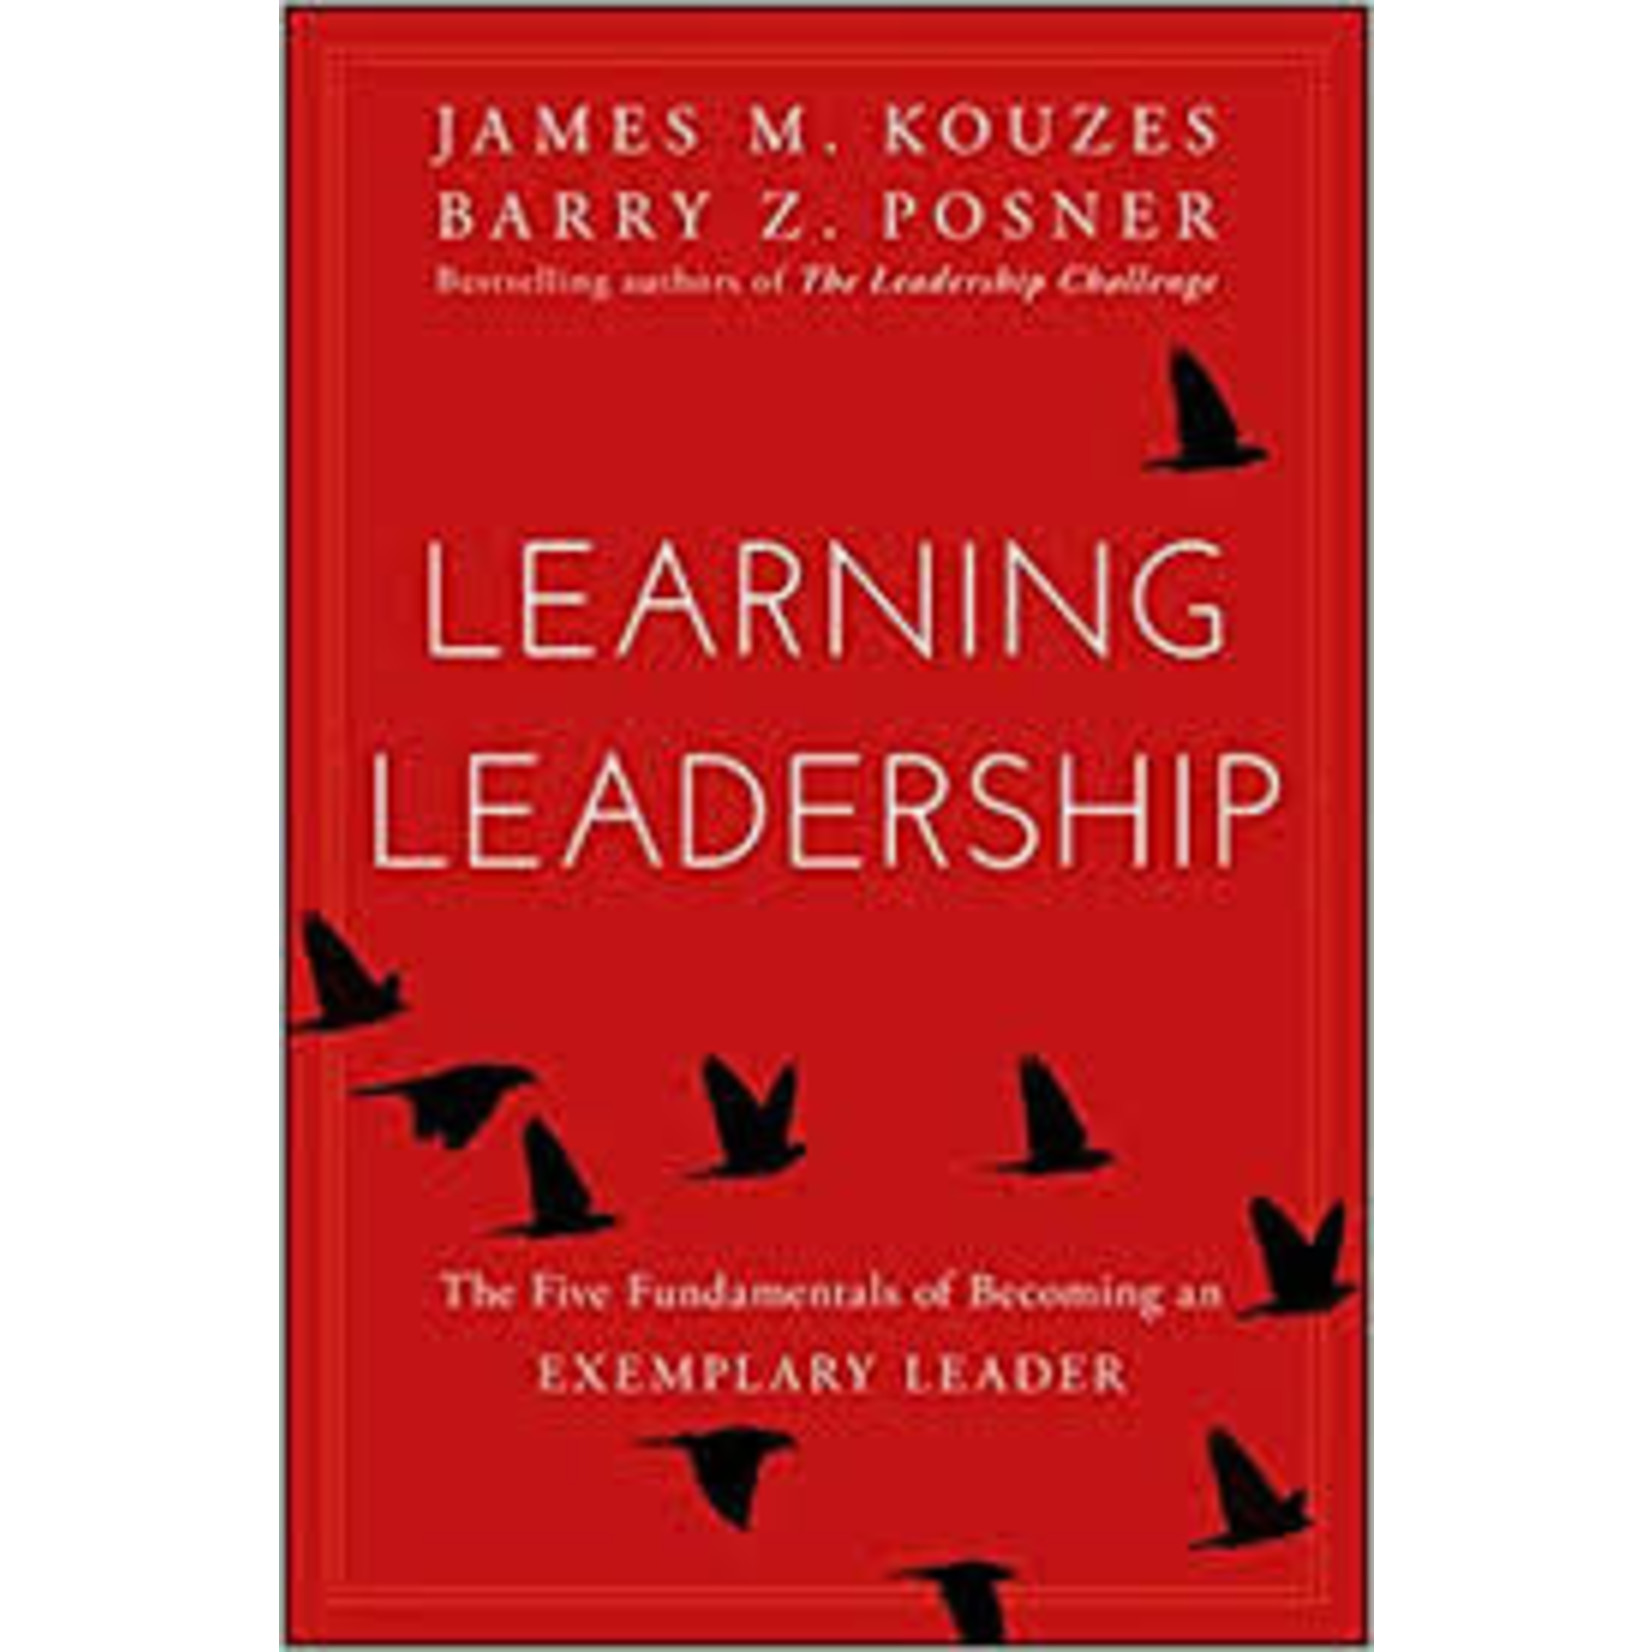 Learning Leadership: The Five Fundamentals